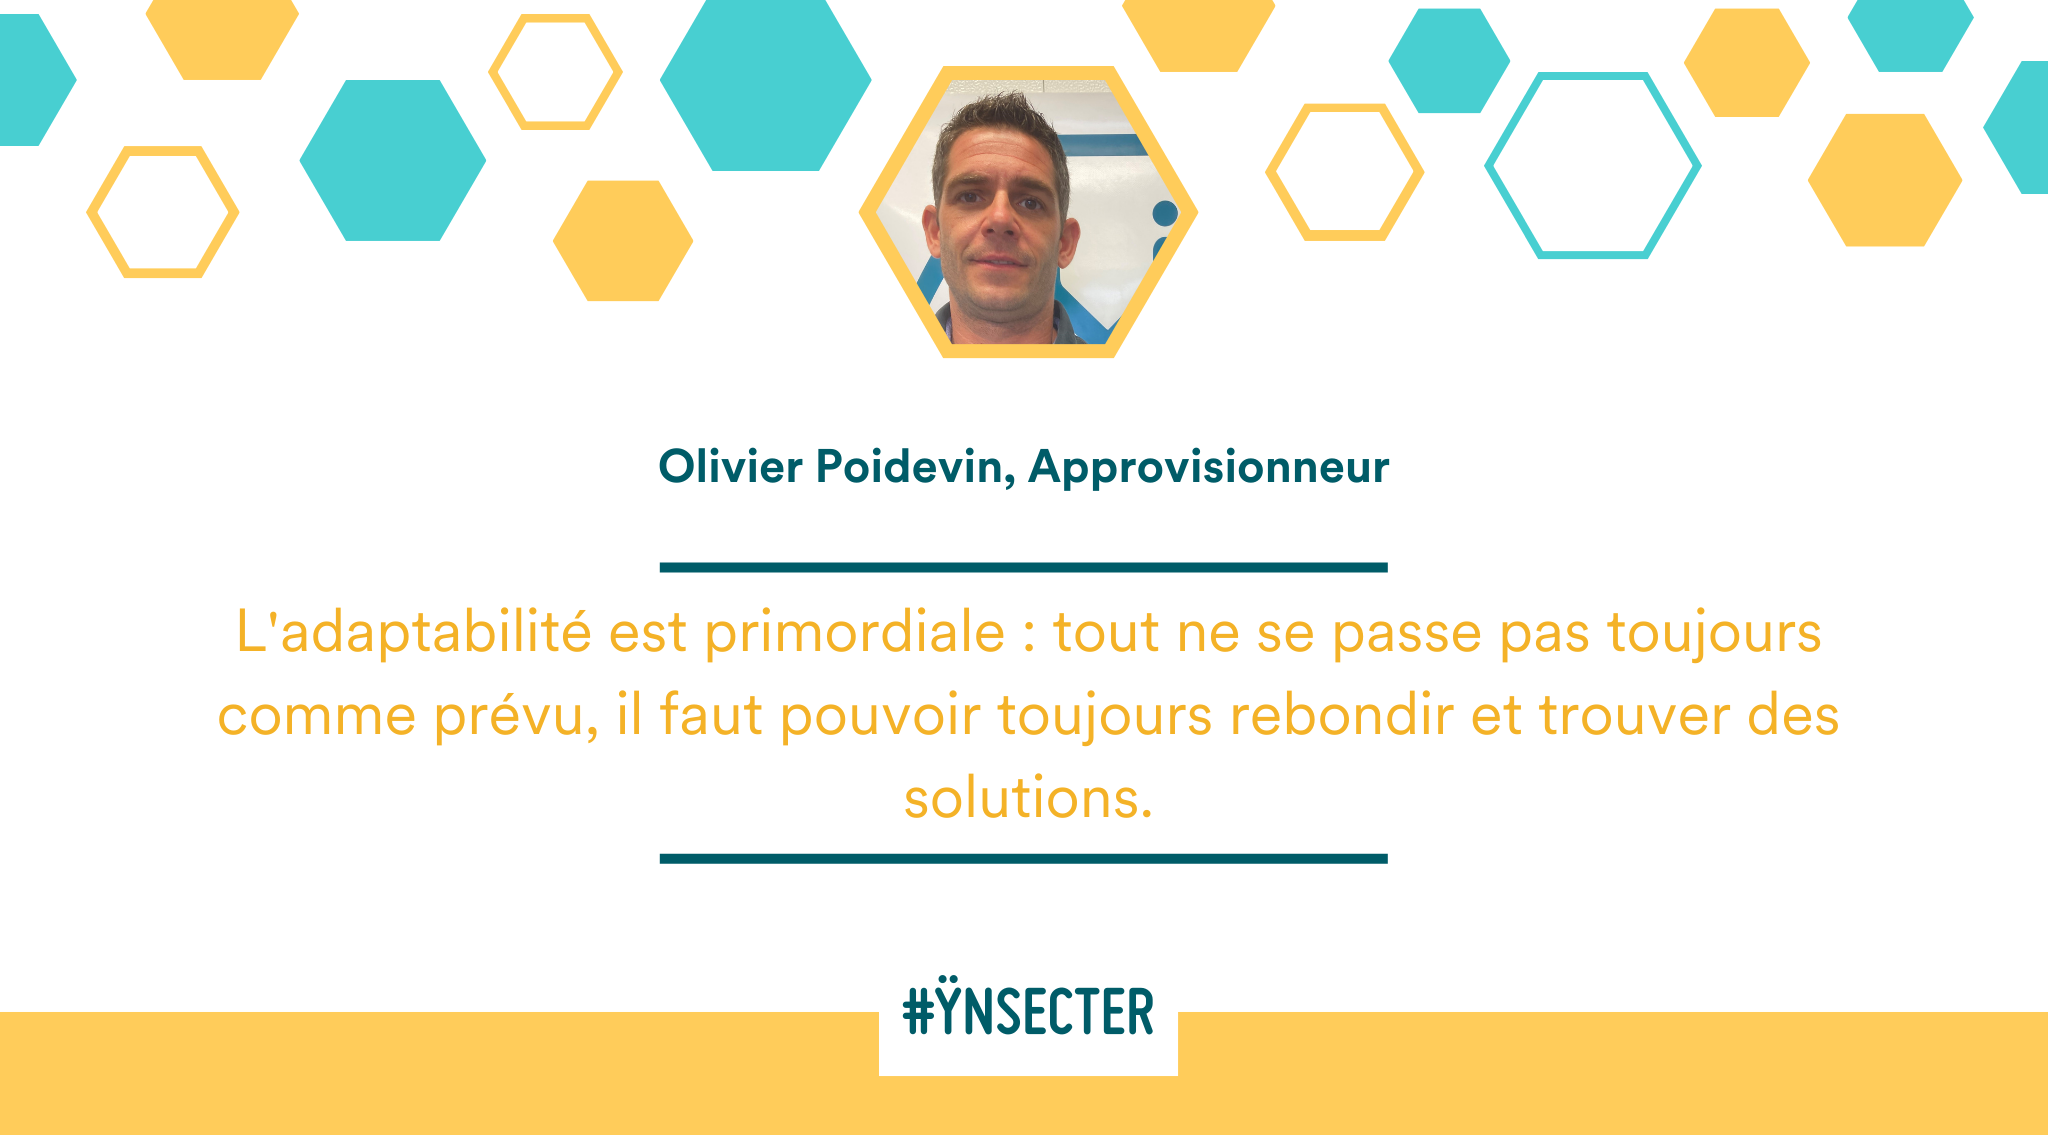 #Ynsecter Olivier Poidevin (1)